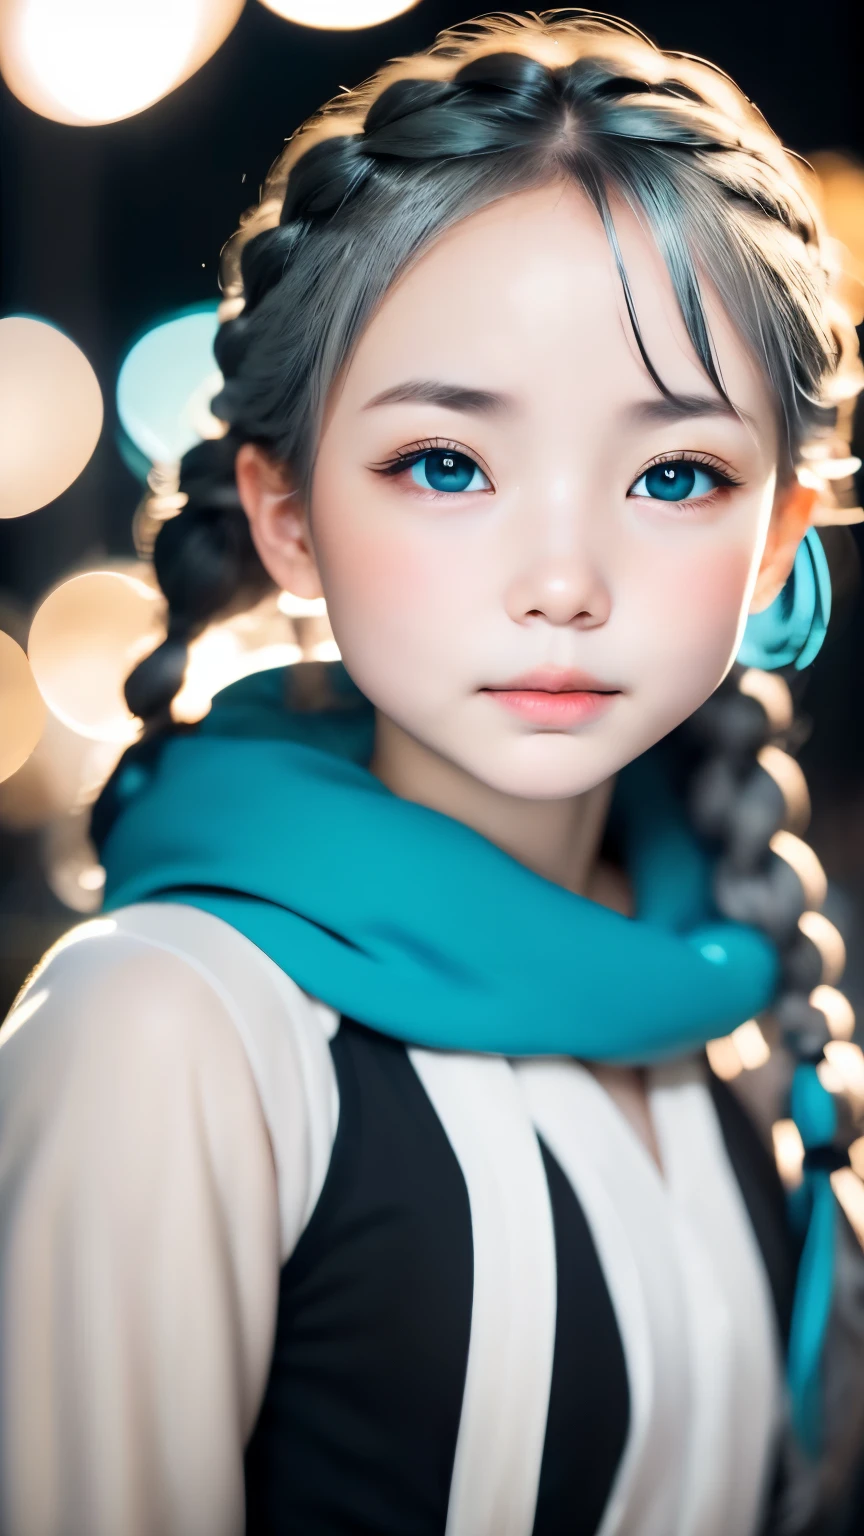 1 girl, white skin、Caucasoid、very cute face、small nose、plump lips、Braids bundled into one、french braid、An ennui look、night, dark, ((ash gray hair)),(Detailed gray eyes)、natural color tunic,National costume, Upper body,Perfect good looks, ((blurred background))、((black background)),((shining turquoise light))、,cinematic lighting,professional photographer,random pose、50ｍｍlens